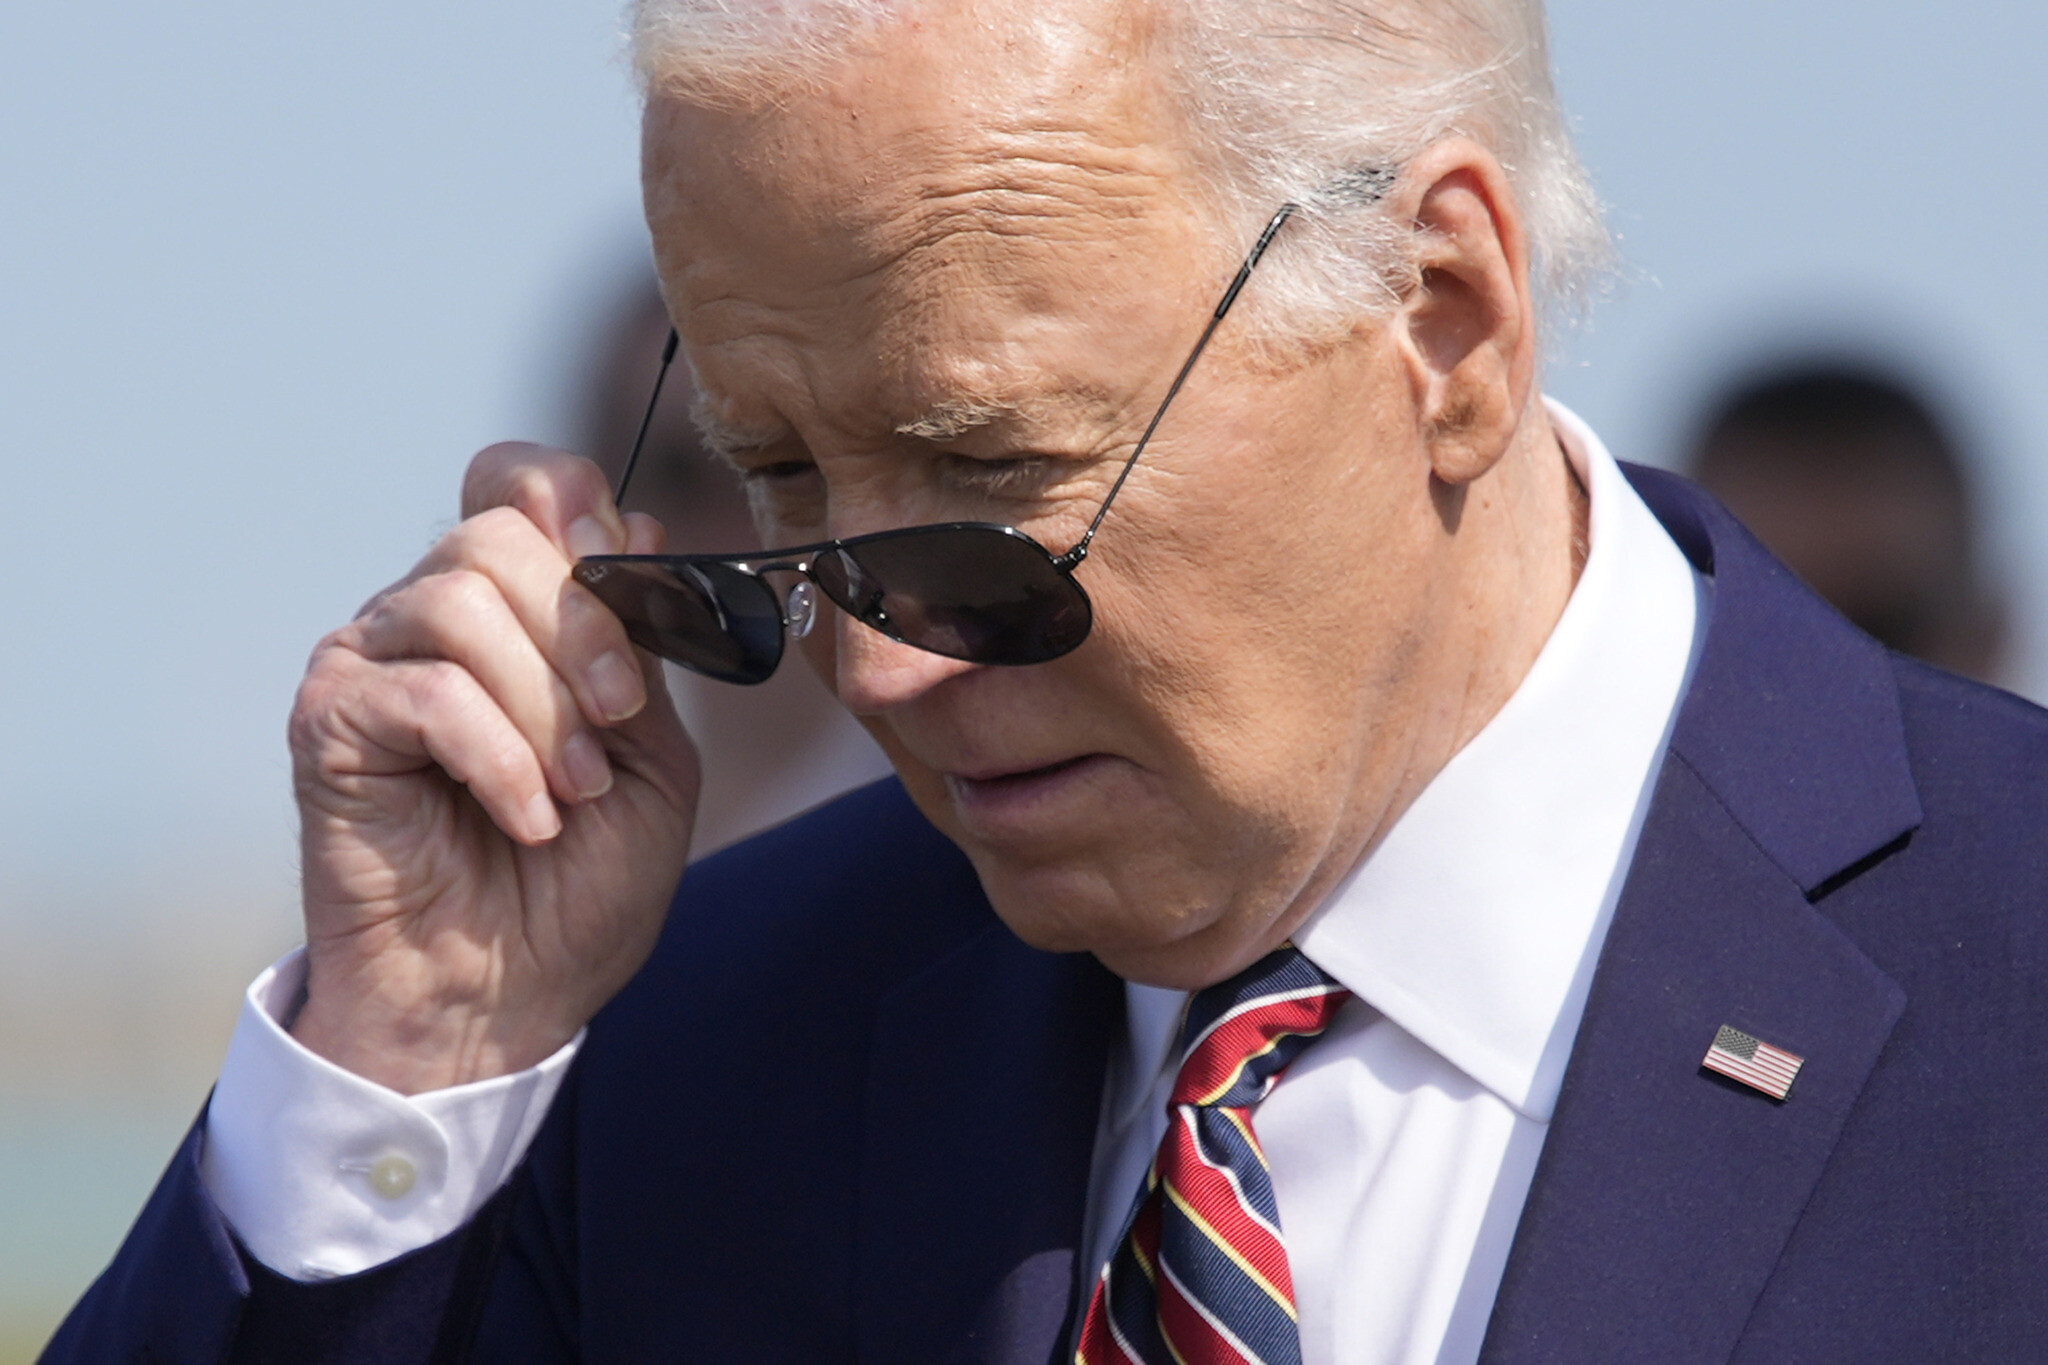 Biden's Debate Hopes Dashed as New Polls Show Trump Leading